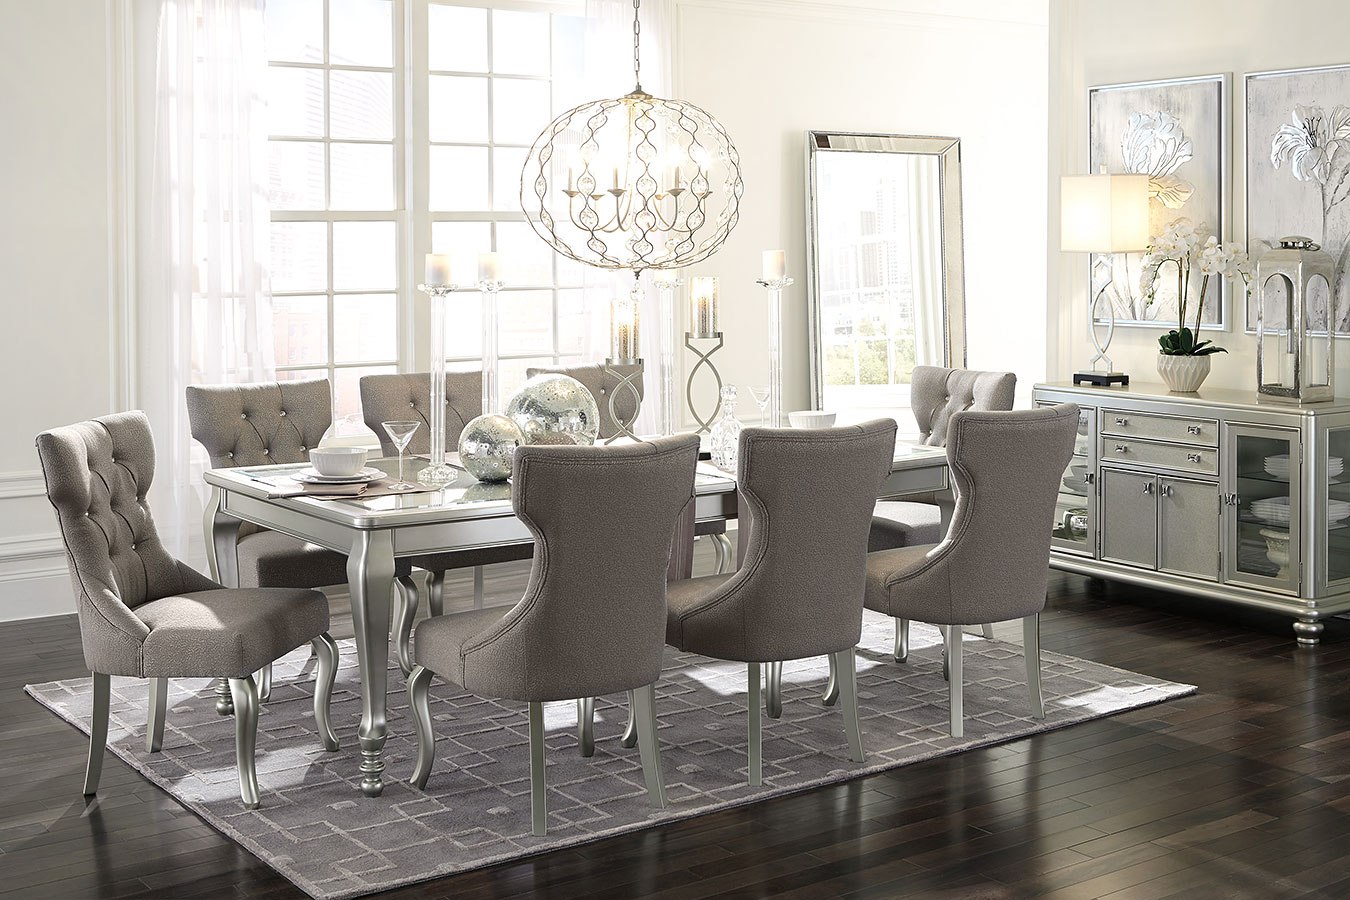 Dining Room Set For 8-10